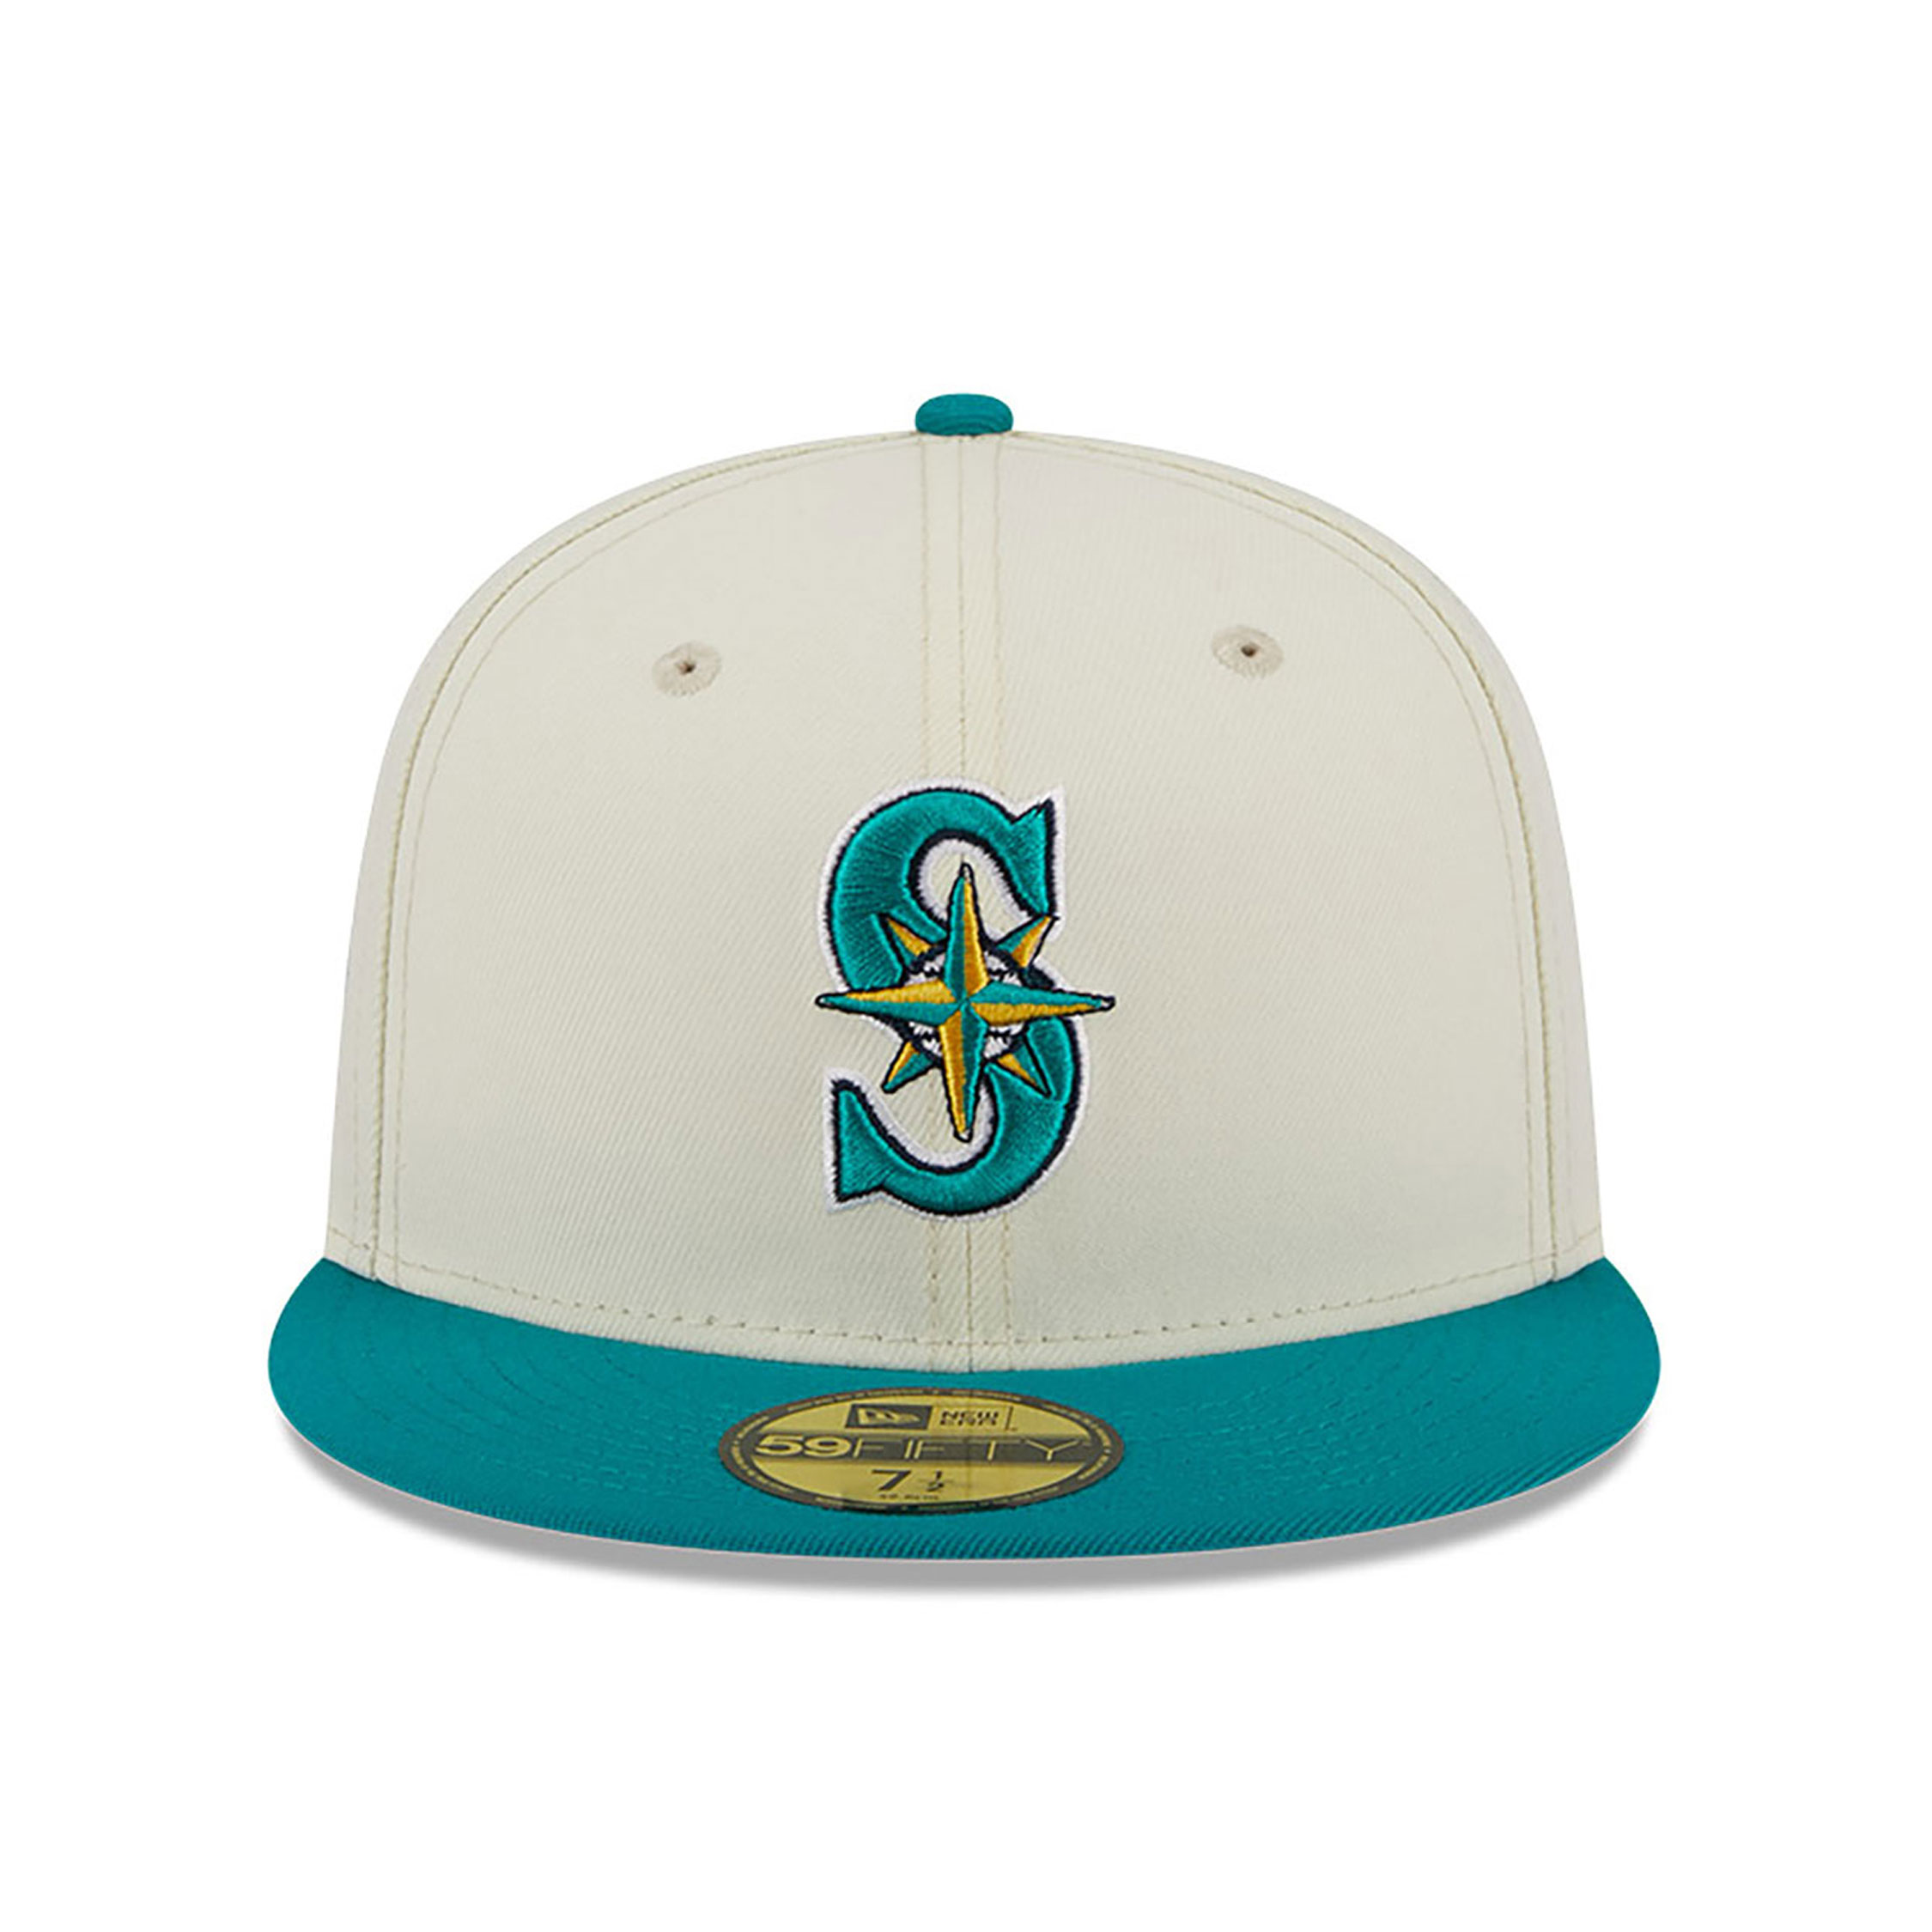 Official New Era MLB All Star Game Fan Pack Seattle Mariners 59FIFTY Fitted  Cap D02_399